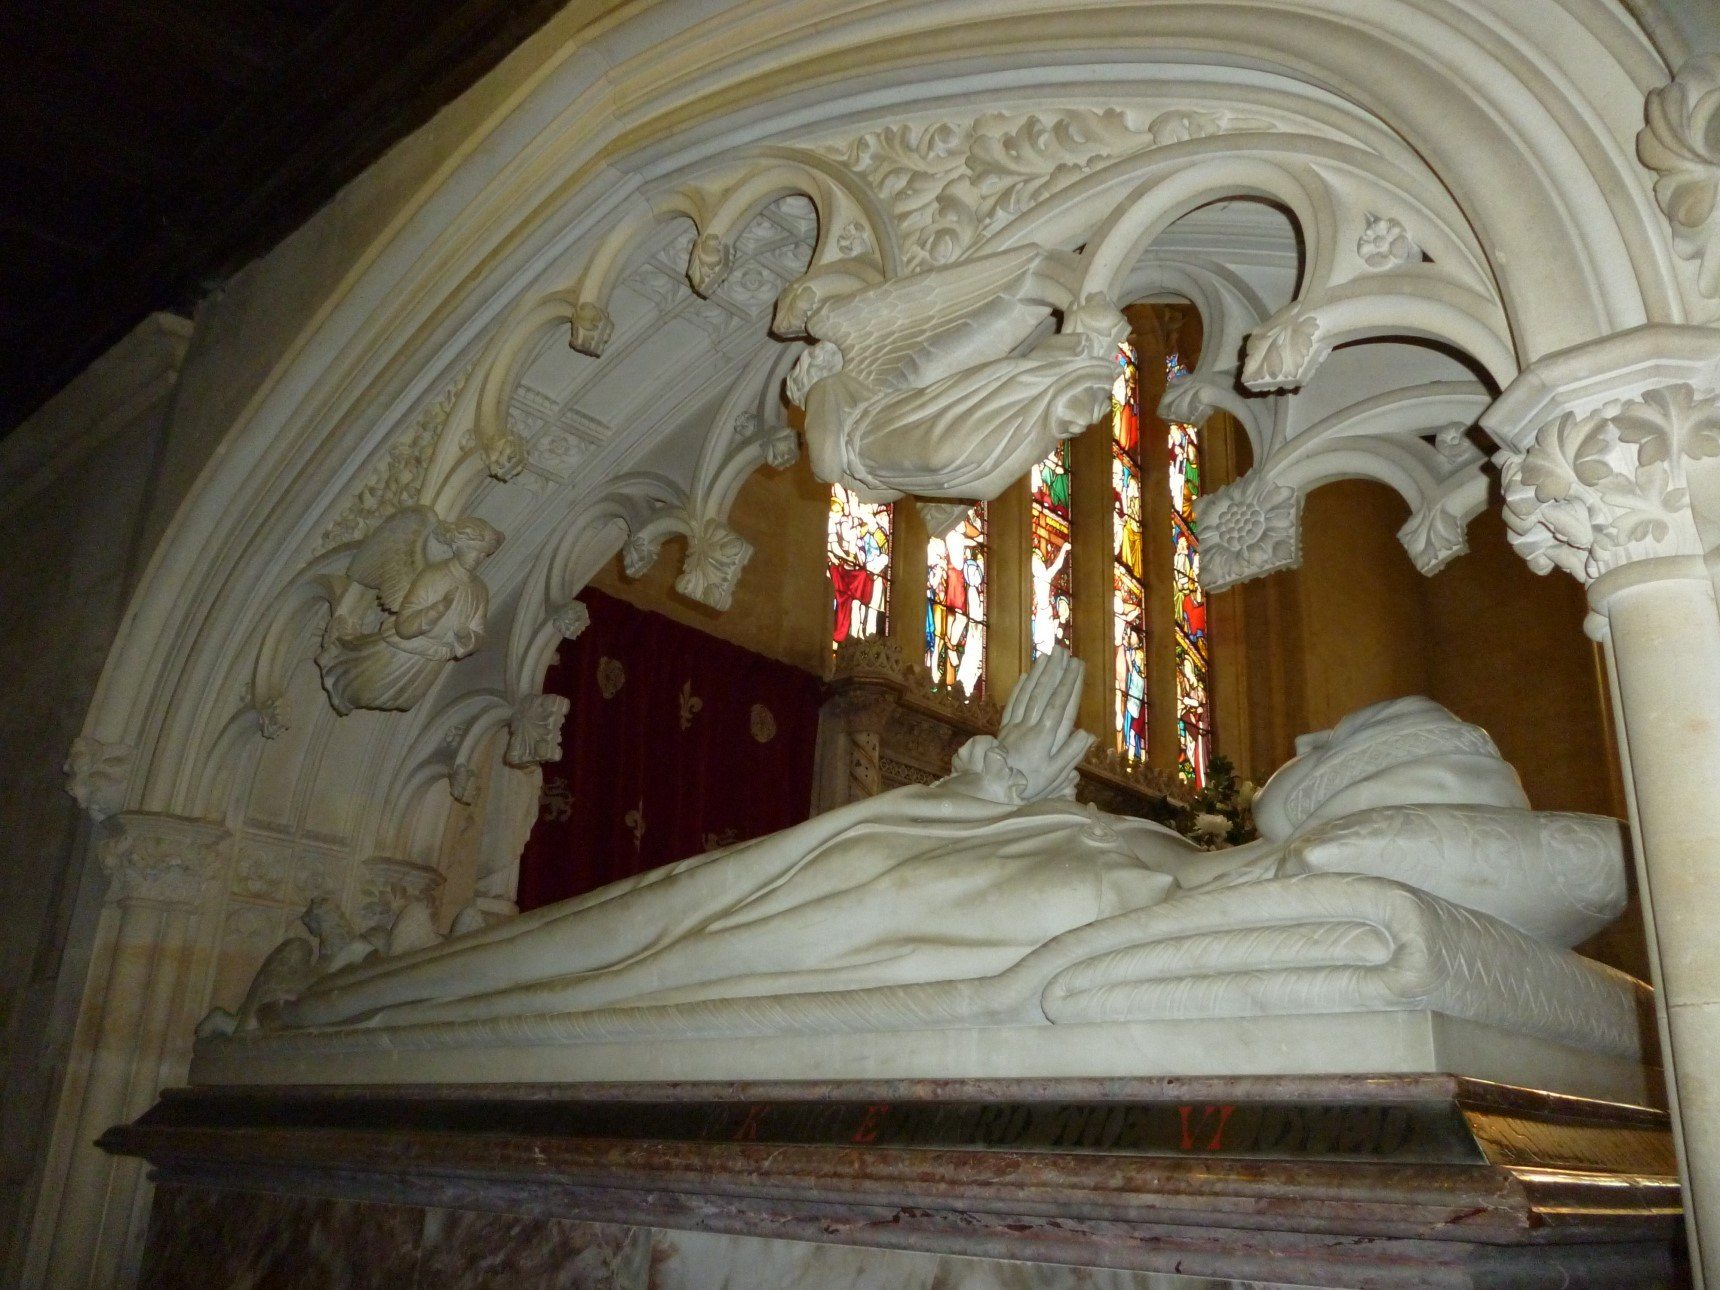 Katherine Parr's Tomb within St Mary's Church